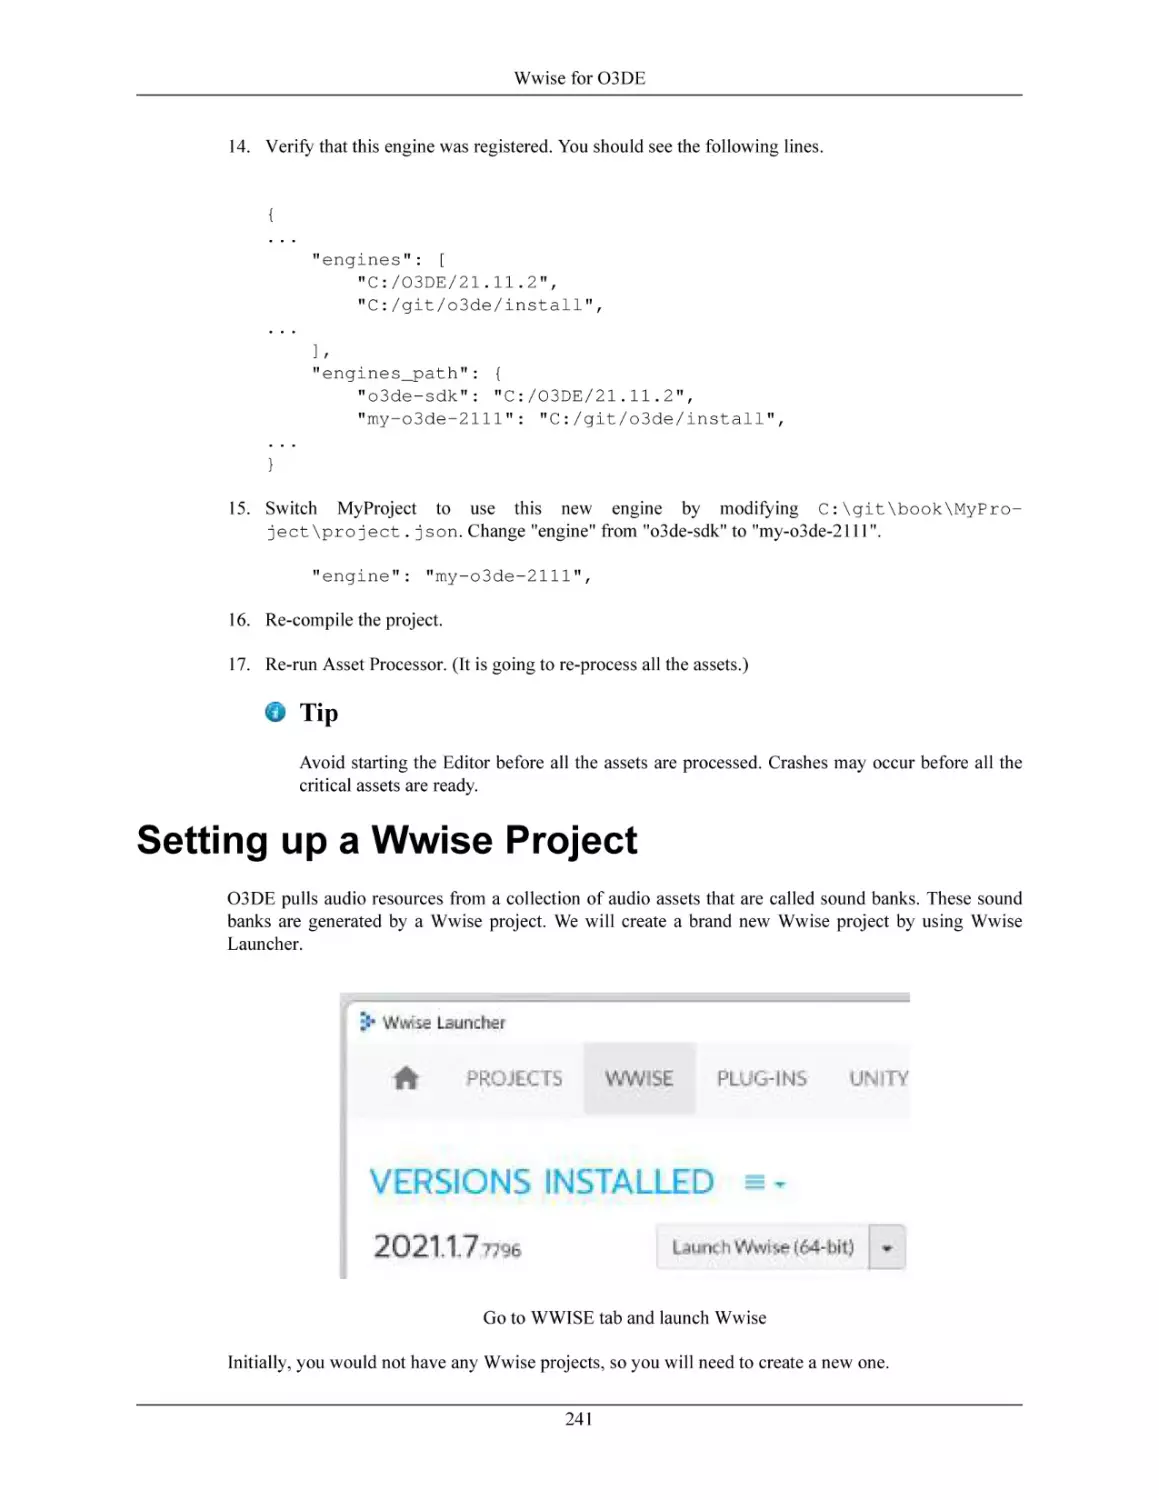 Setting up a Wwise Project